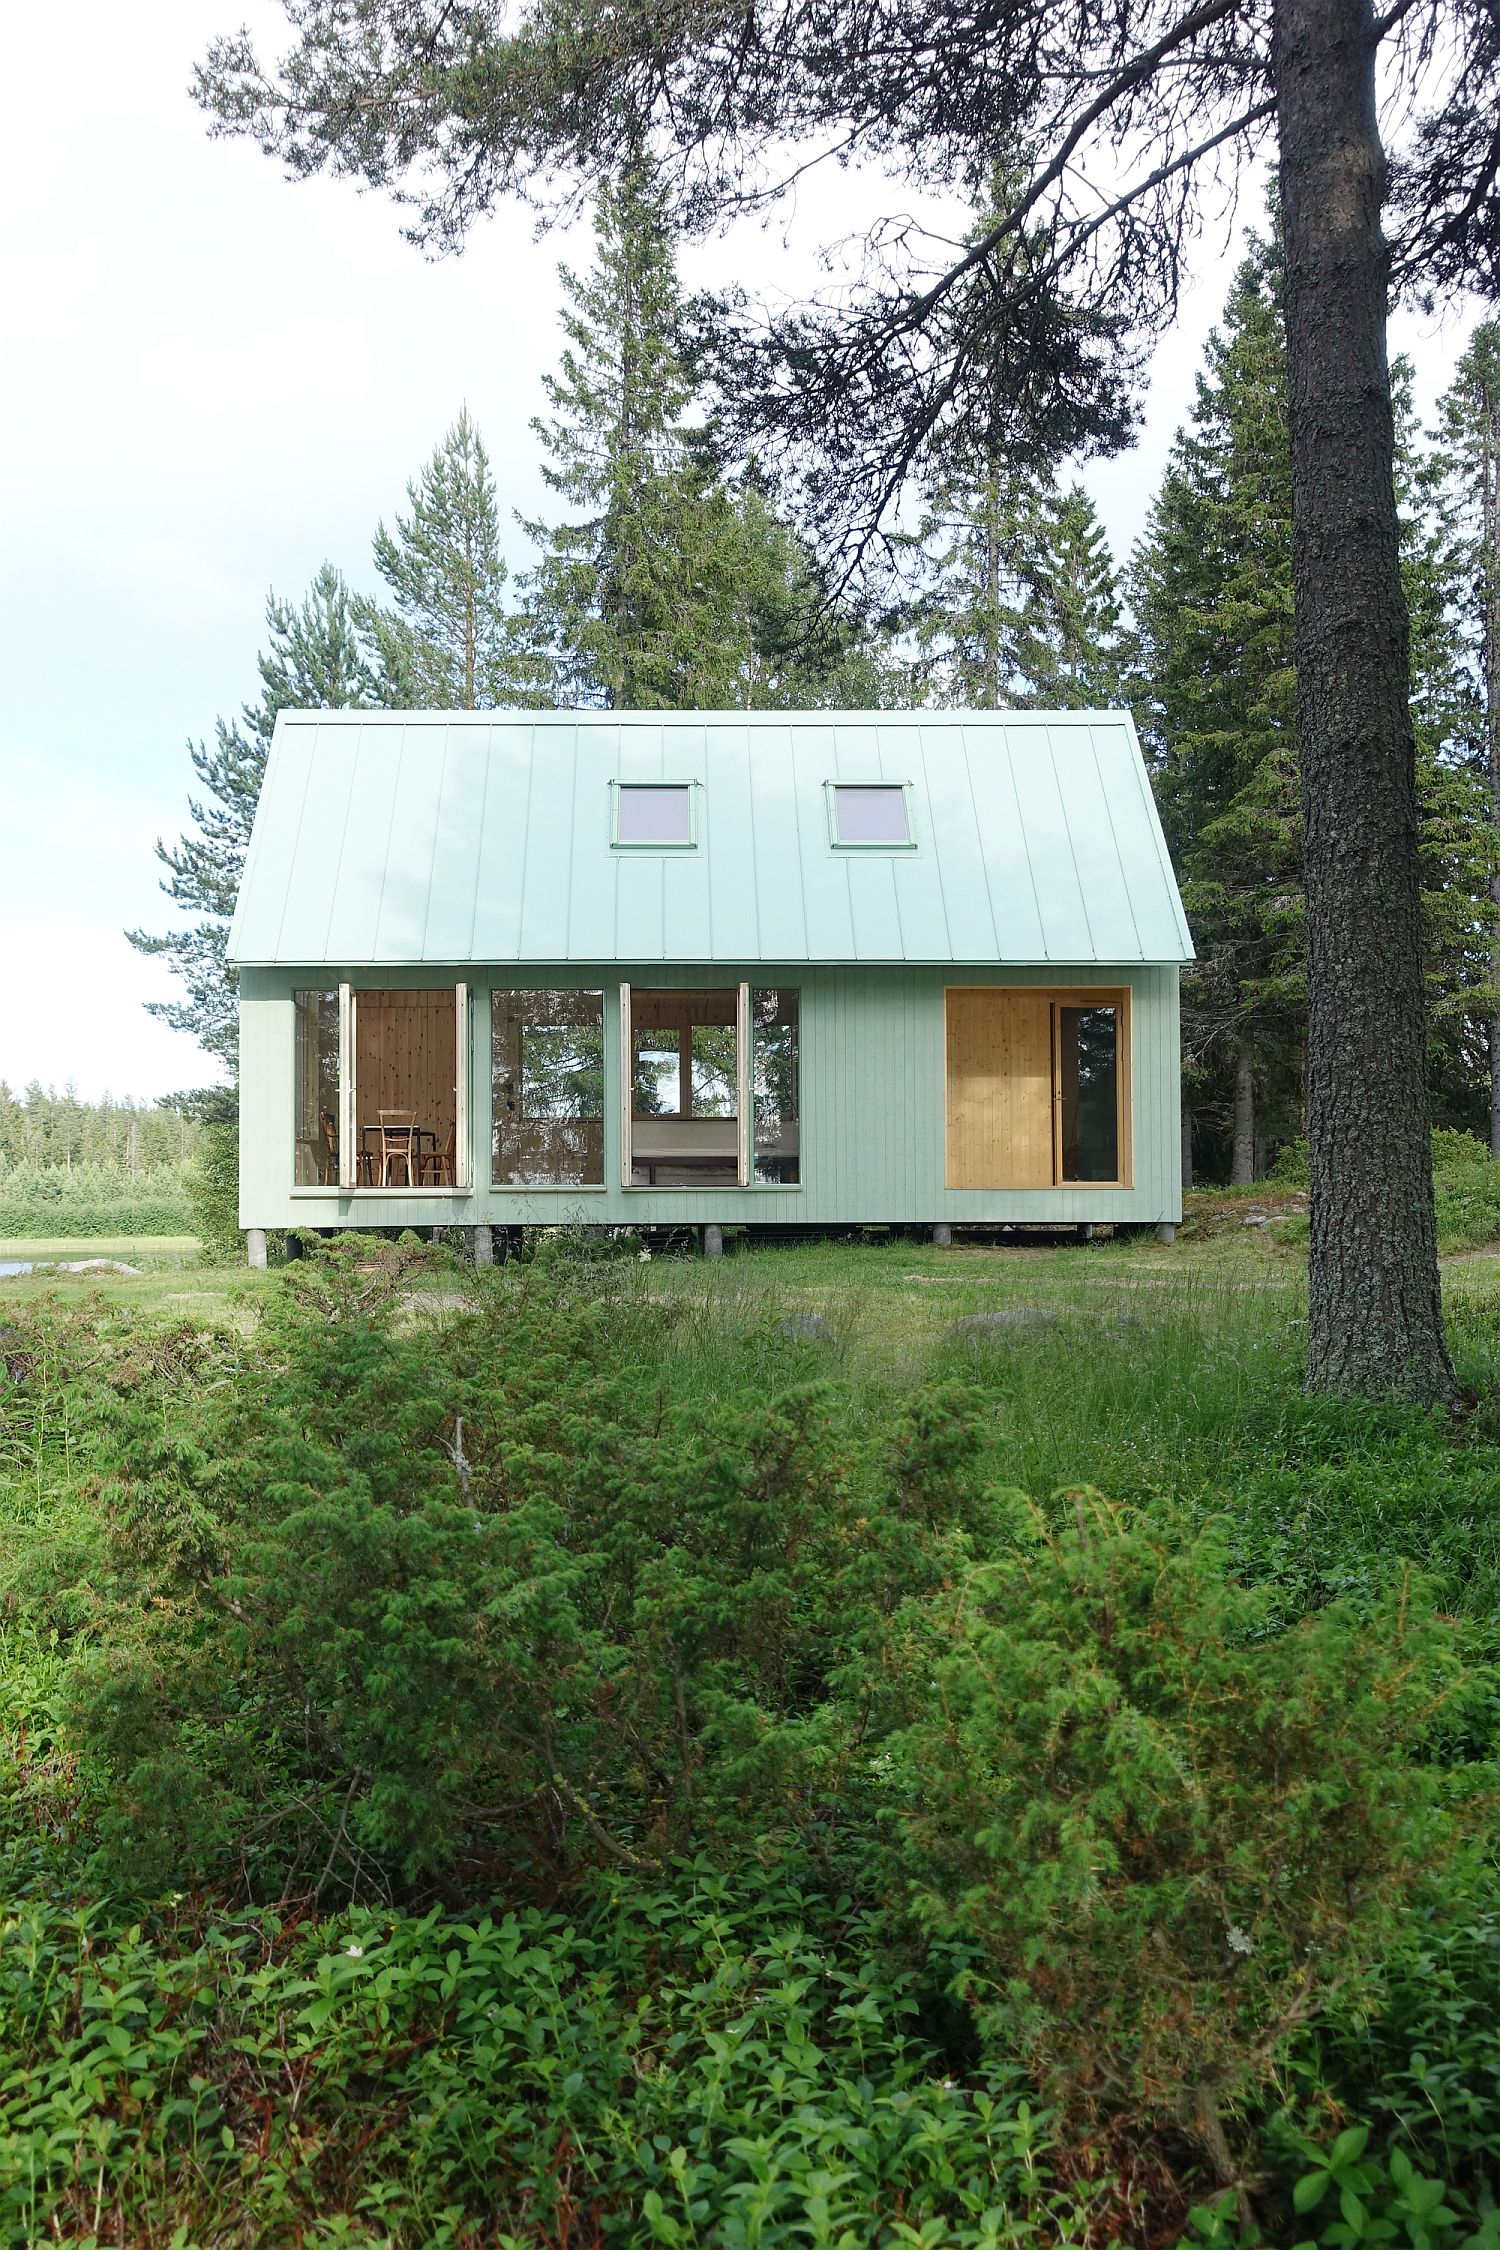 Tall-trees-and-natural-greenery-surround-the-cabin-on-the-island